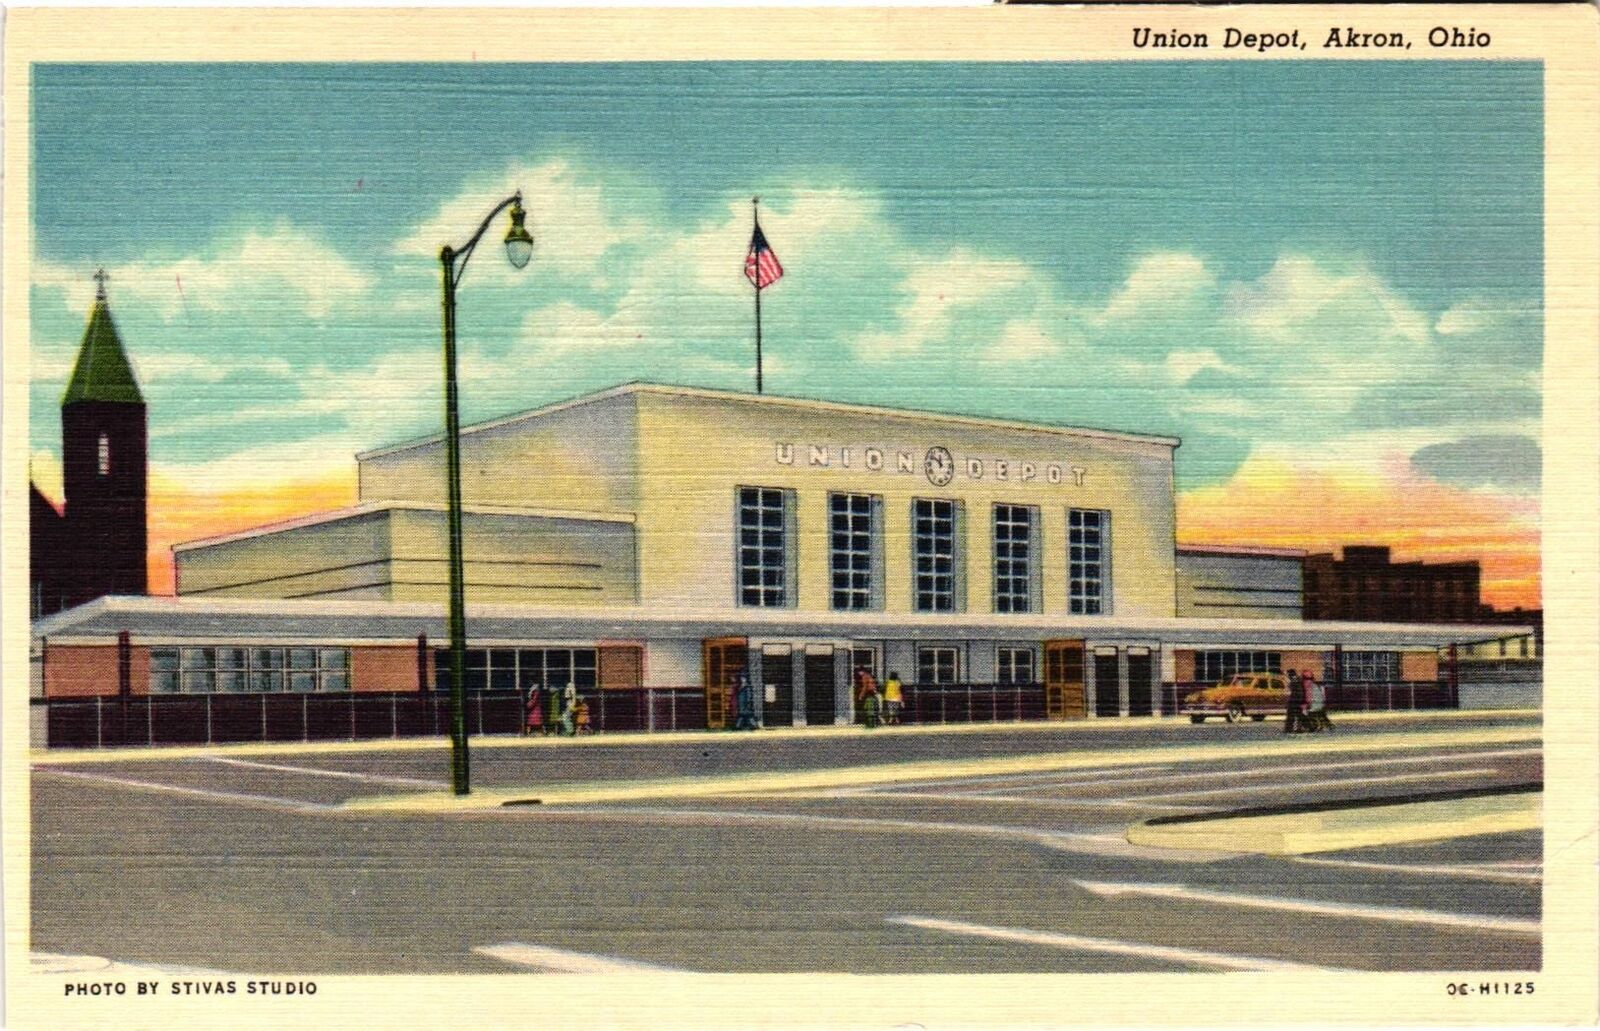 Vintage Postcard- UNION DEPOT, AKRON, OH. Early 1900s